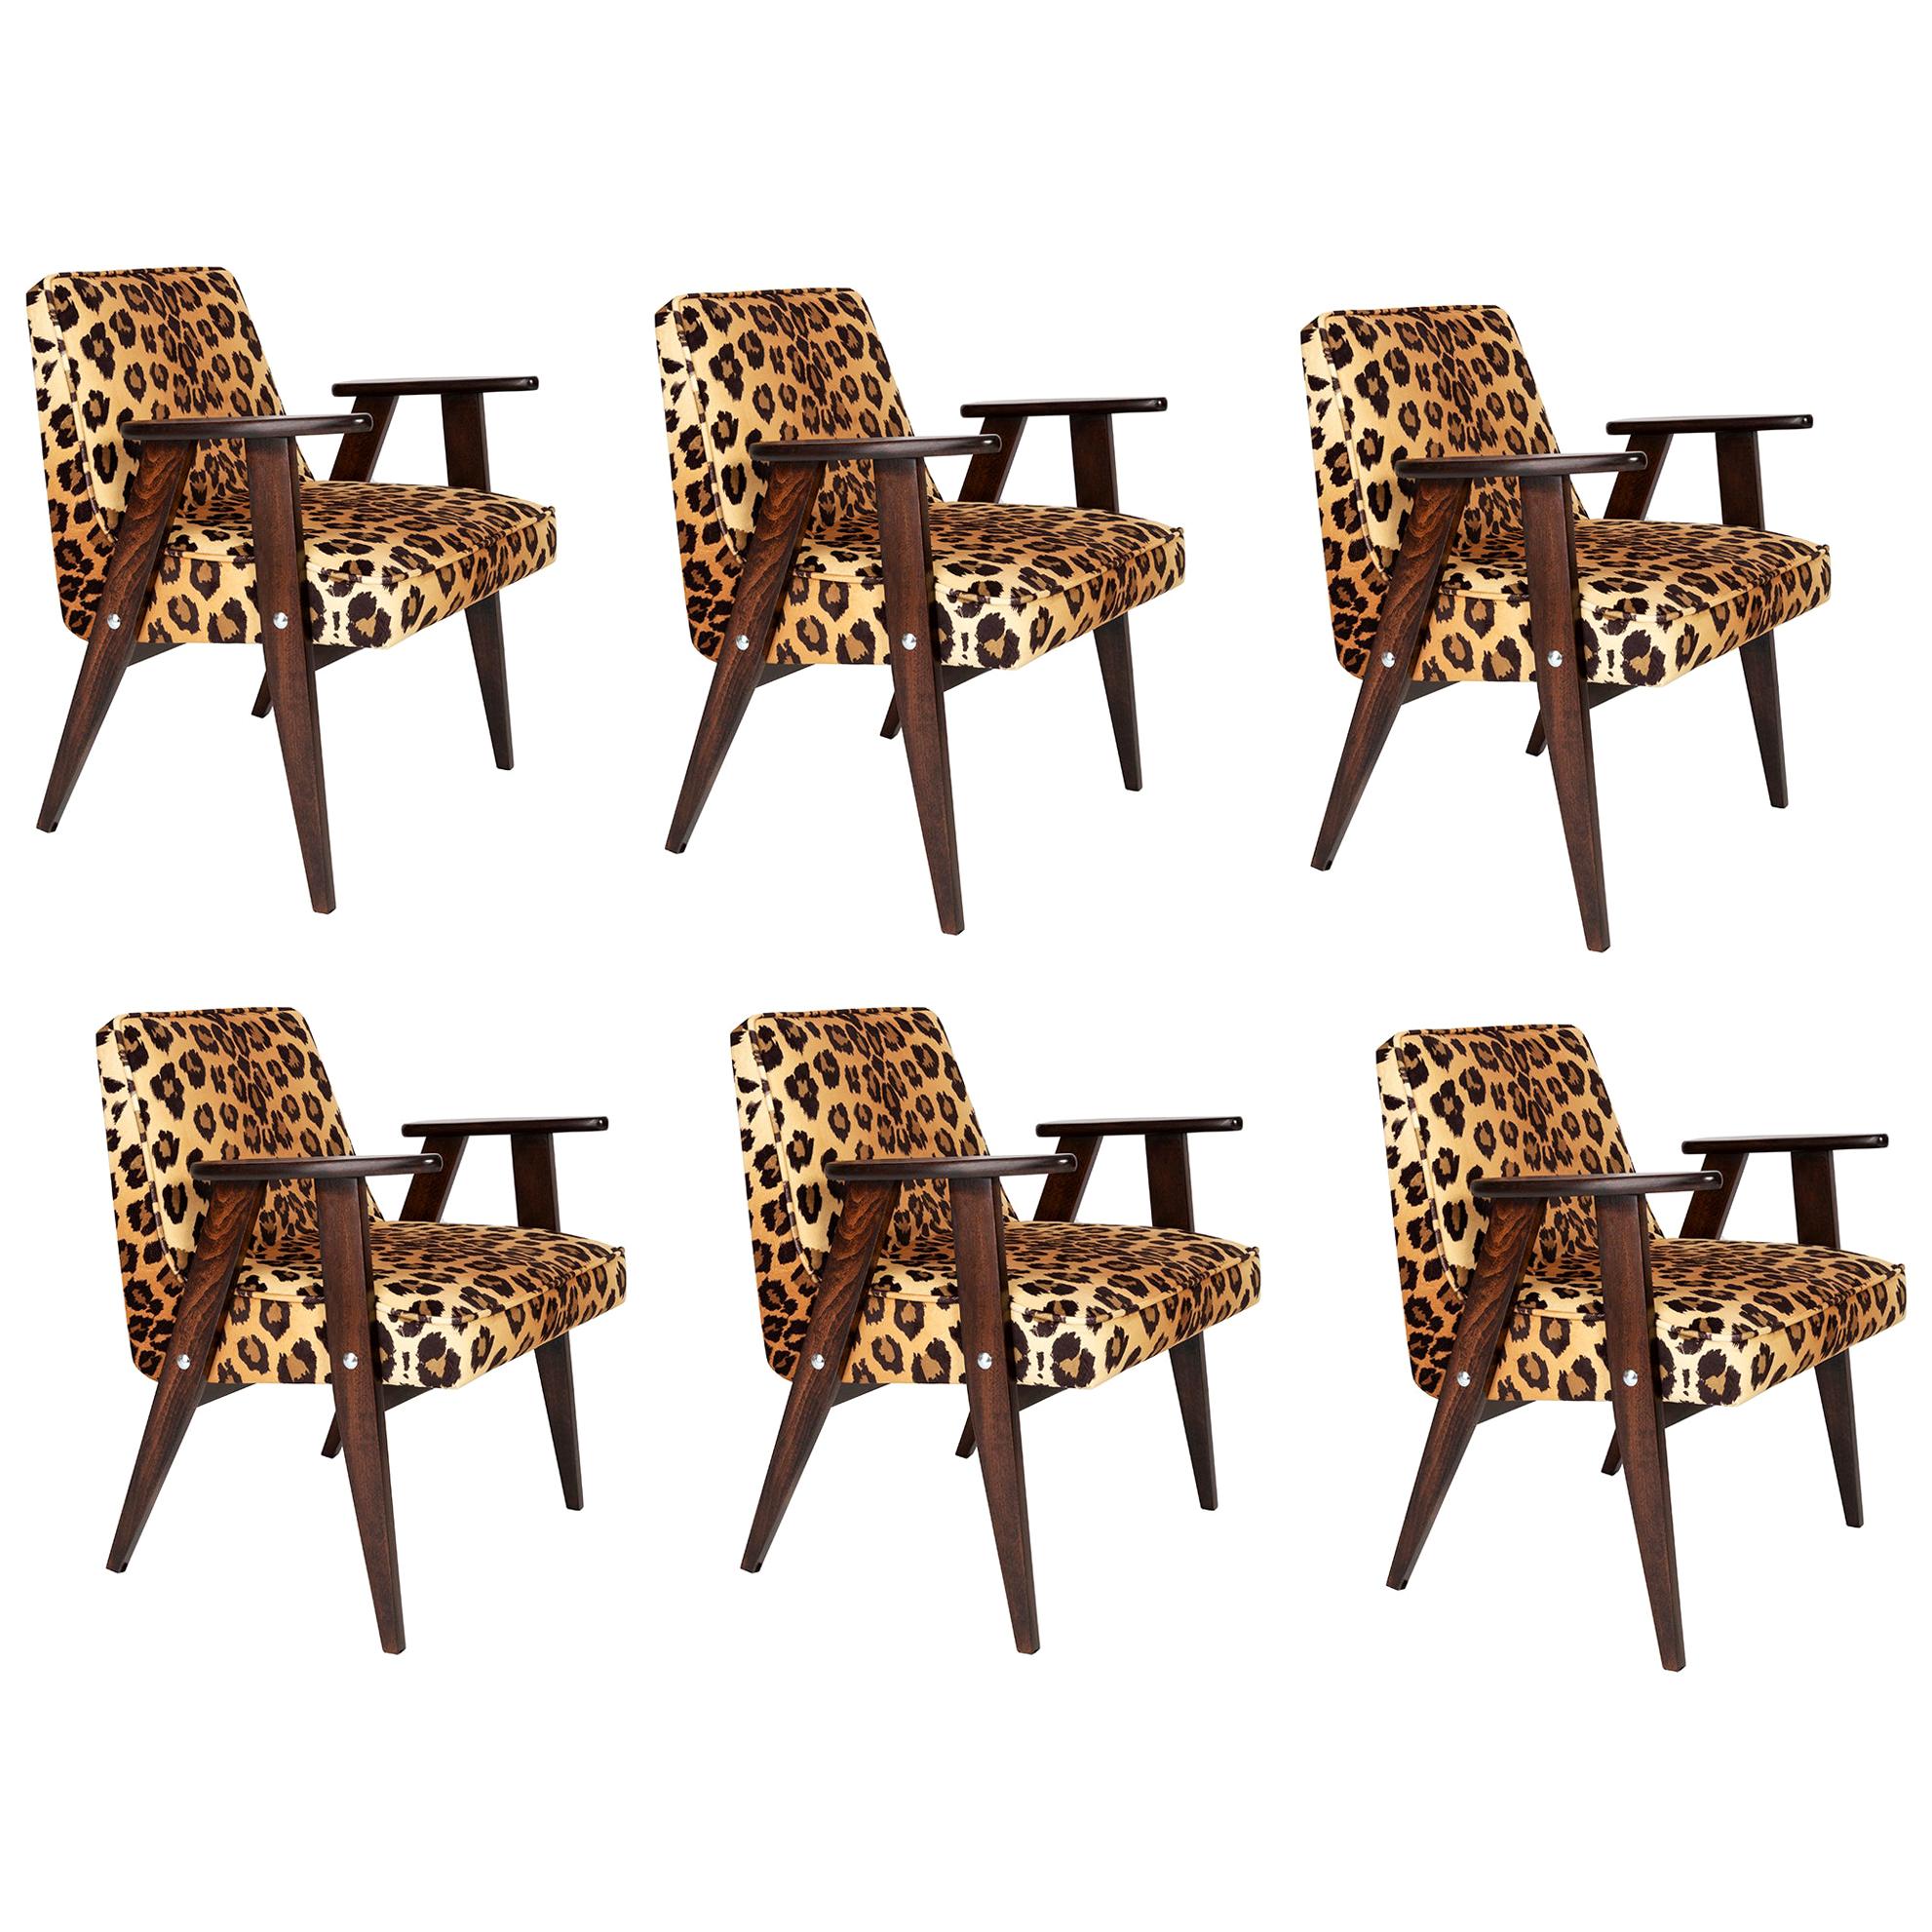 Six Midcentury 366 Armchairs in Leopard Print Velvet, Jozef Chierowski, 1960s For Sale